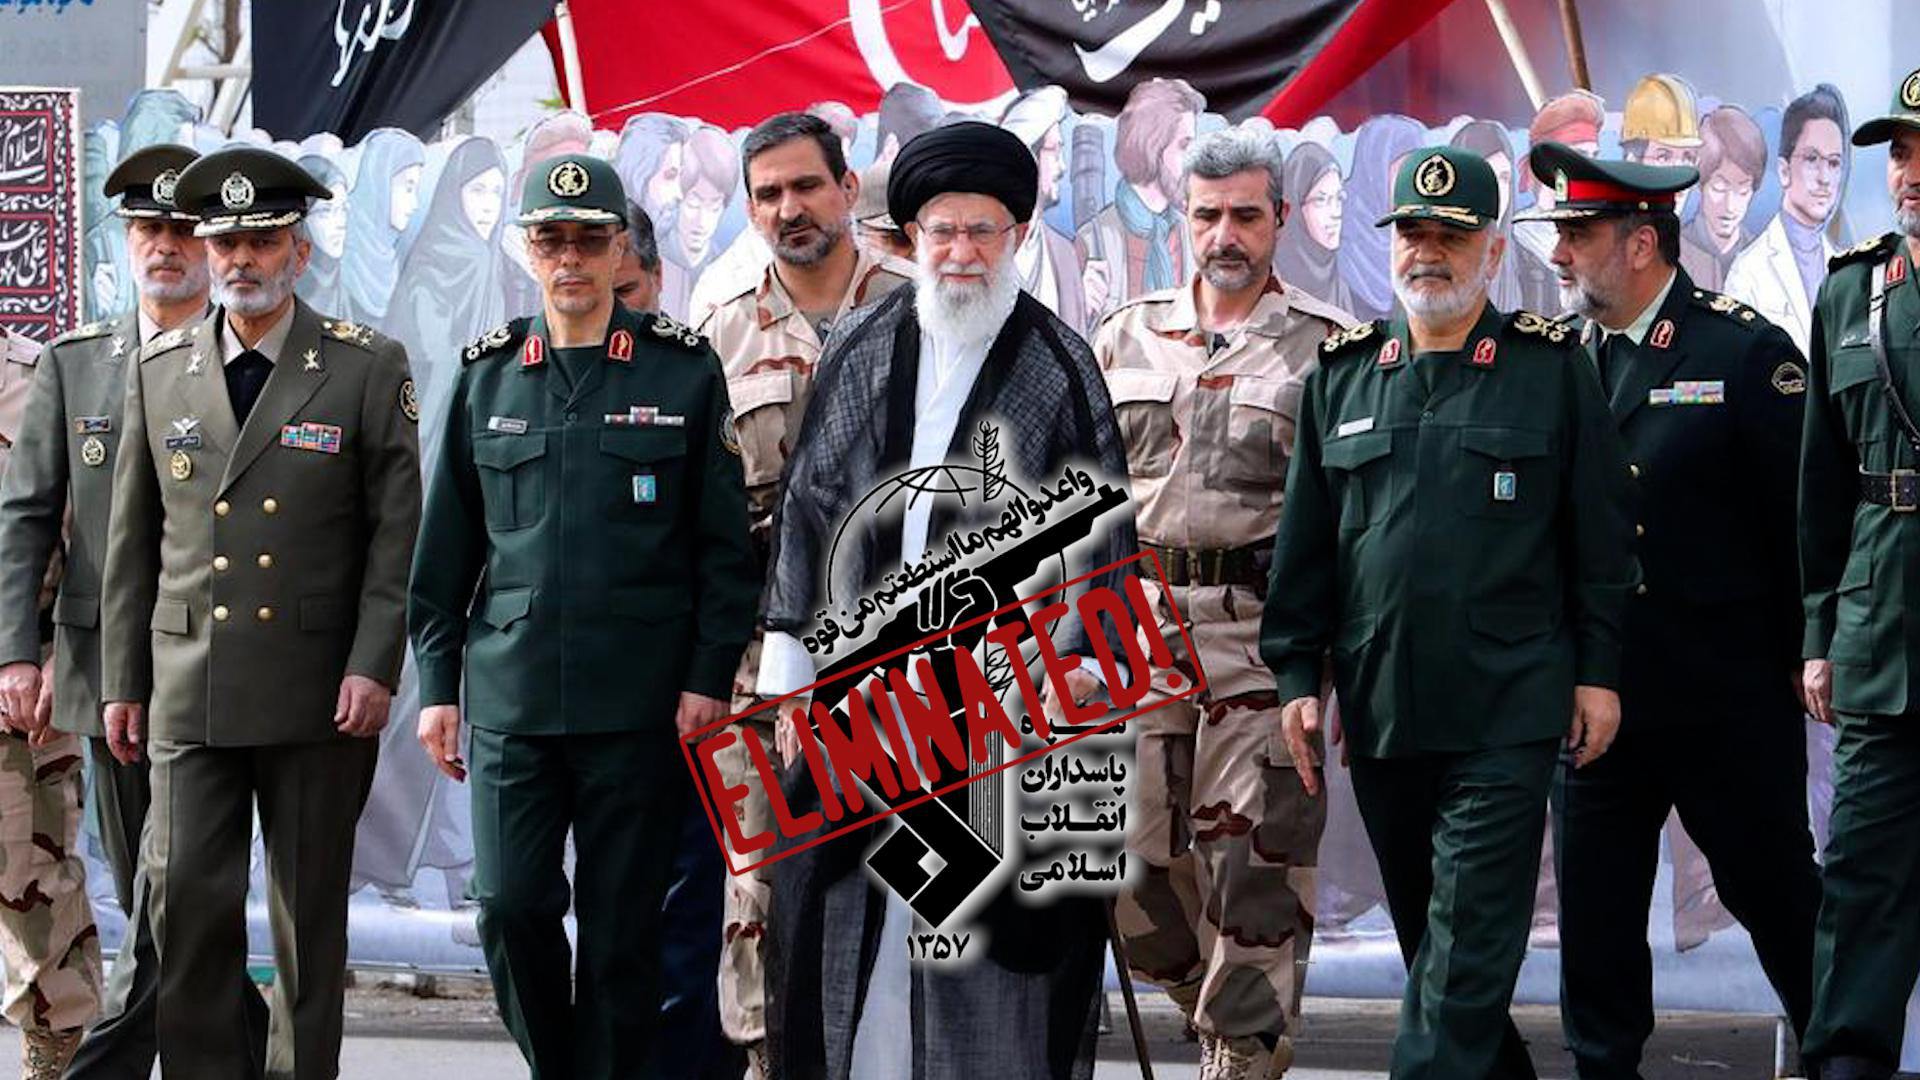 ifmat - Five reasons why the IRGC should be abolished